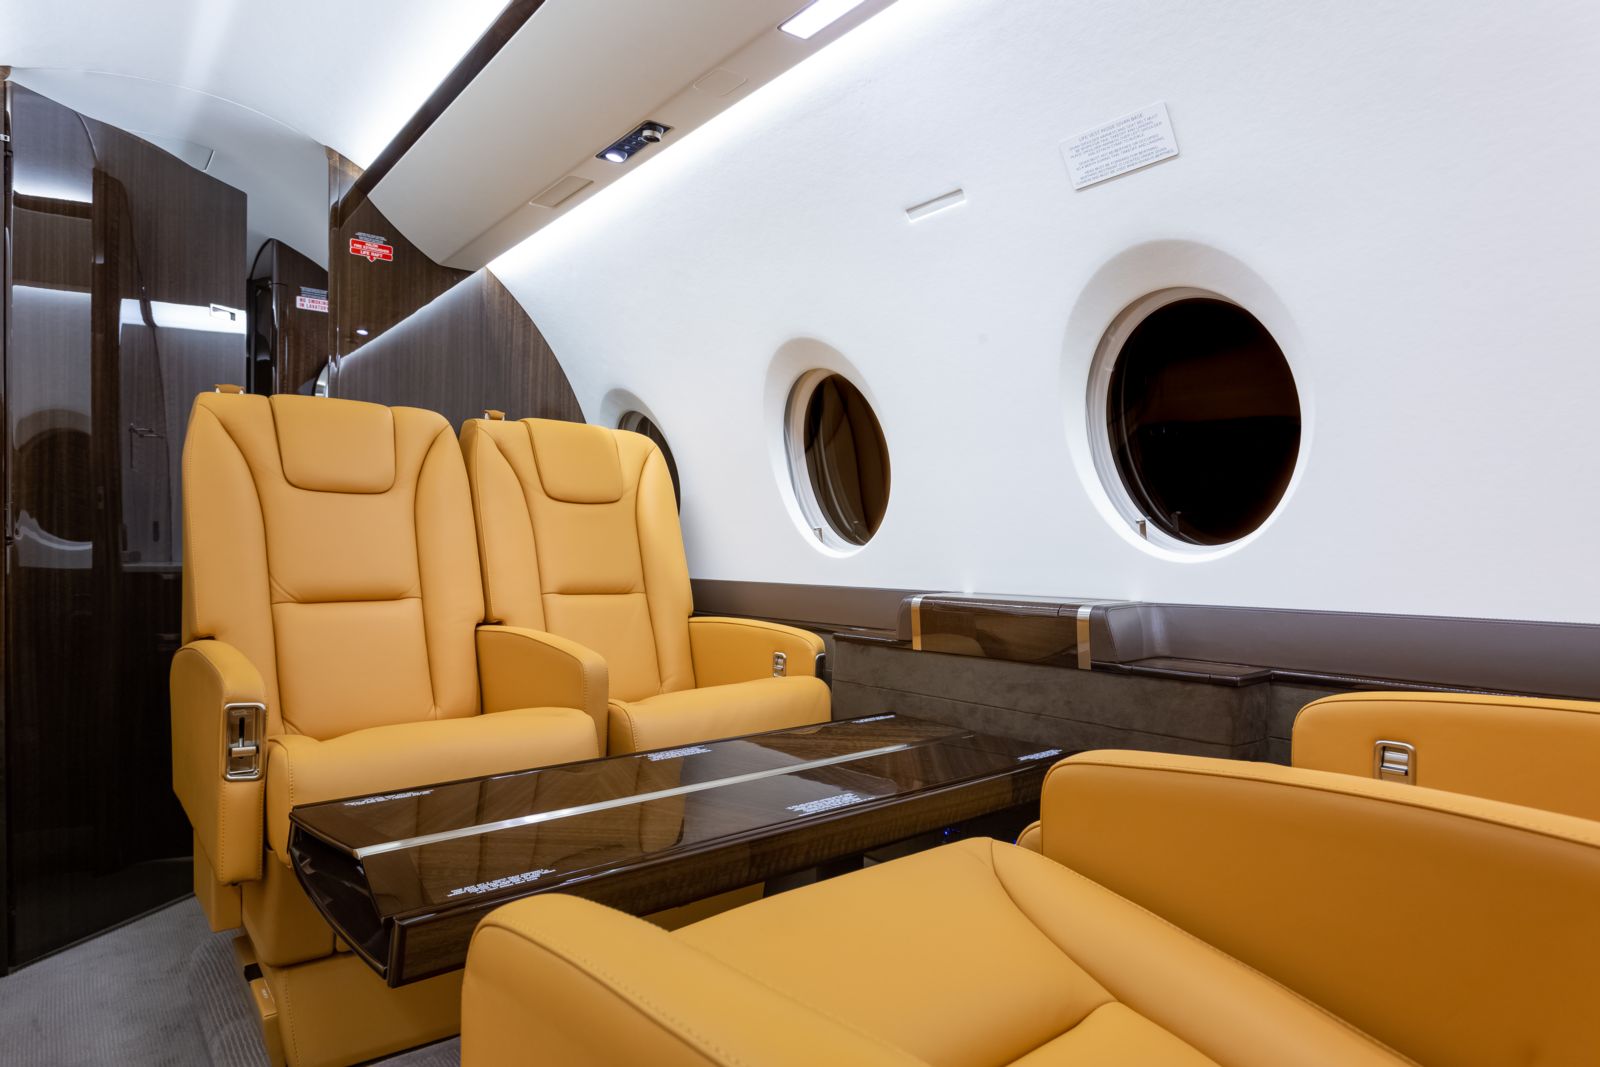 Gulfstream G280  S/N 2052 for sale | gallery image: /userfiles/images/2052/bfp_1974.jpg